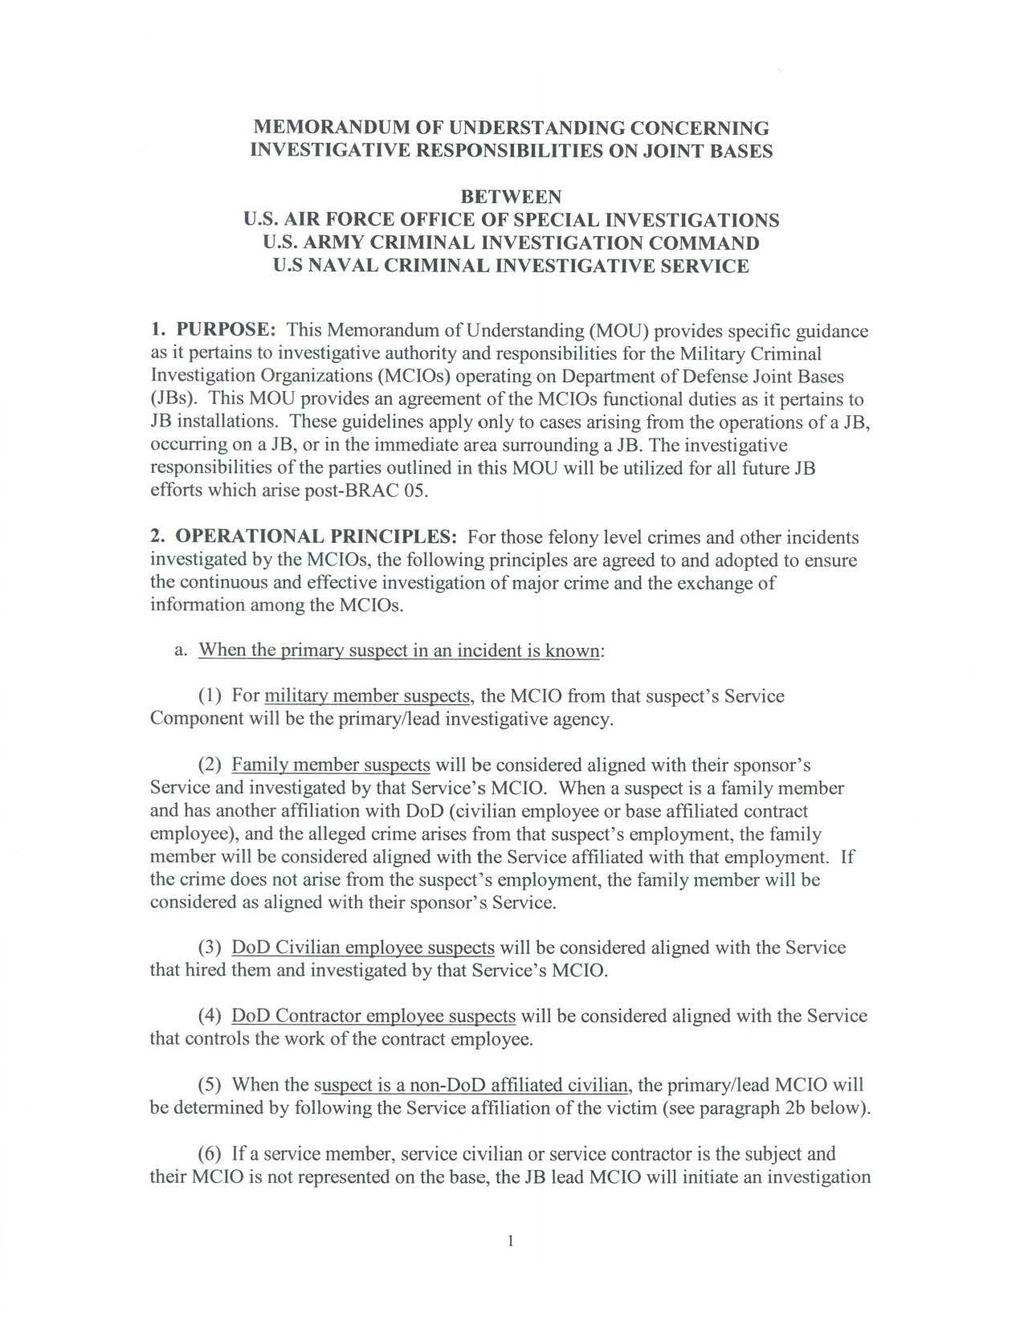 MEMORANDUM OF UNDERSTANDING CONCERNING INVESTIGATIVE RESPONSIBILITIES ON JOINT BASES BETWEEN U.S. AIR FORCE OFFICE OF SPECIAL INVESTIGATIONS U.S. ARMY CRIMINAL INVESTIGATION COMMAND U.